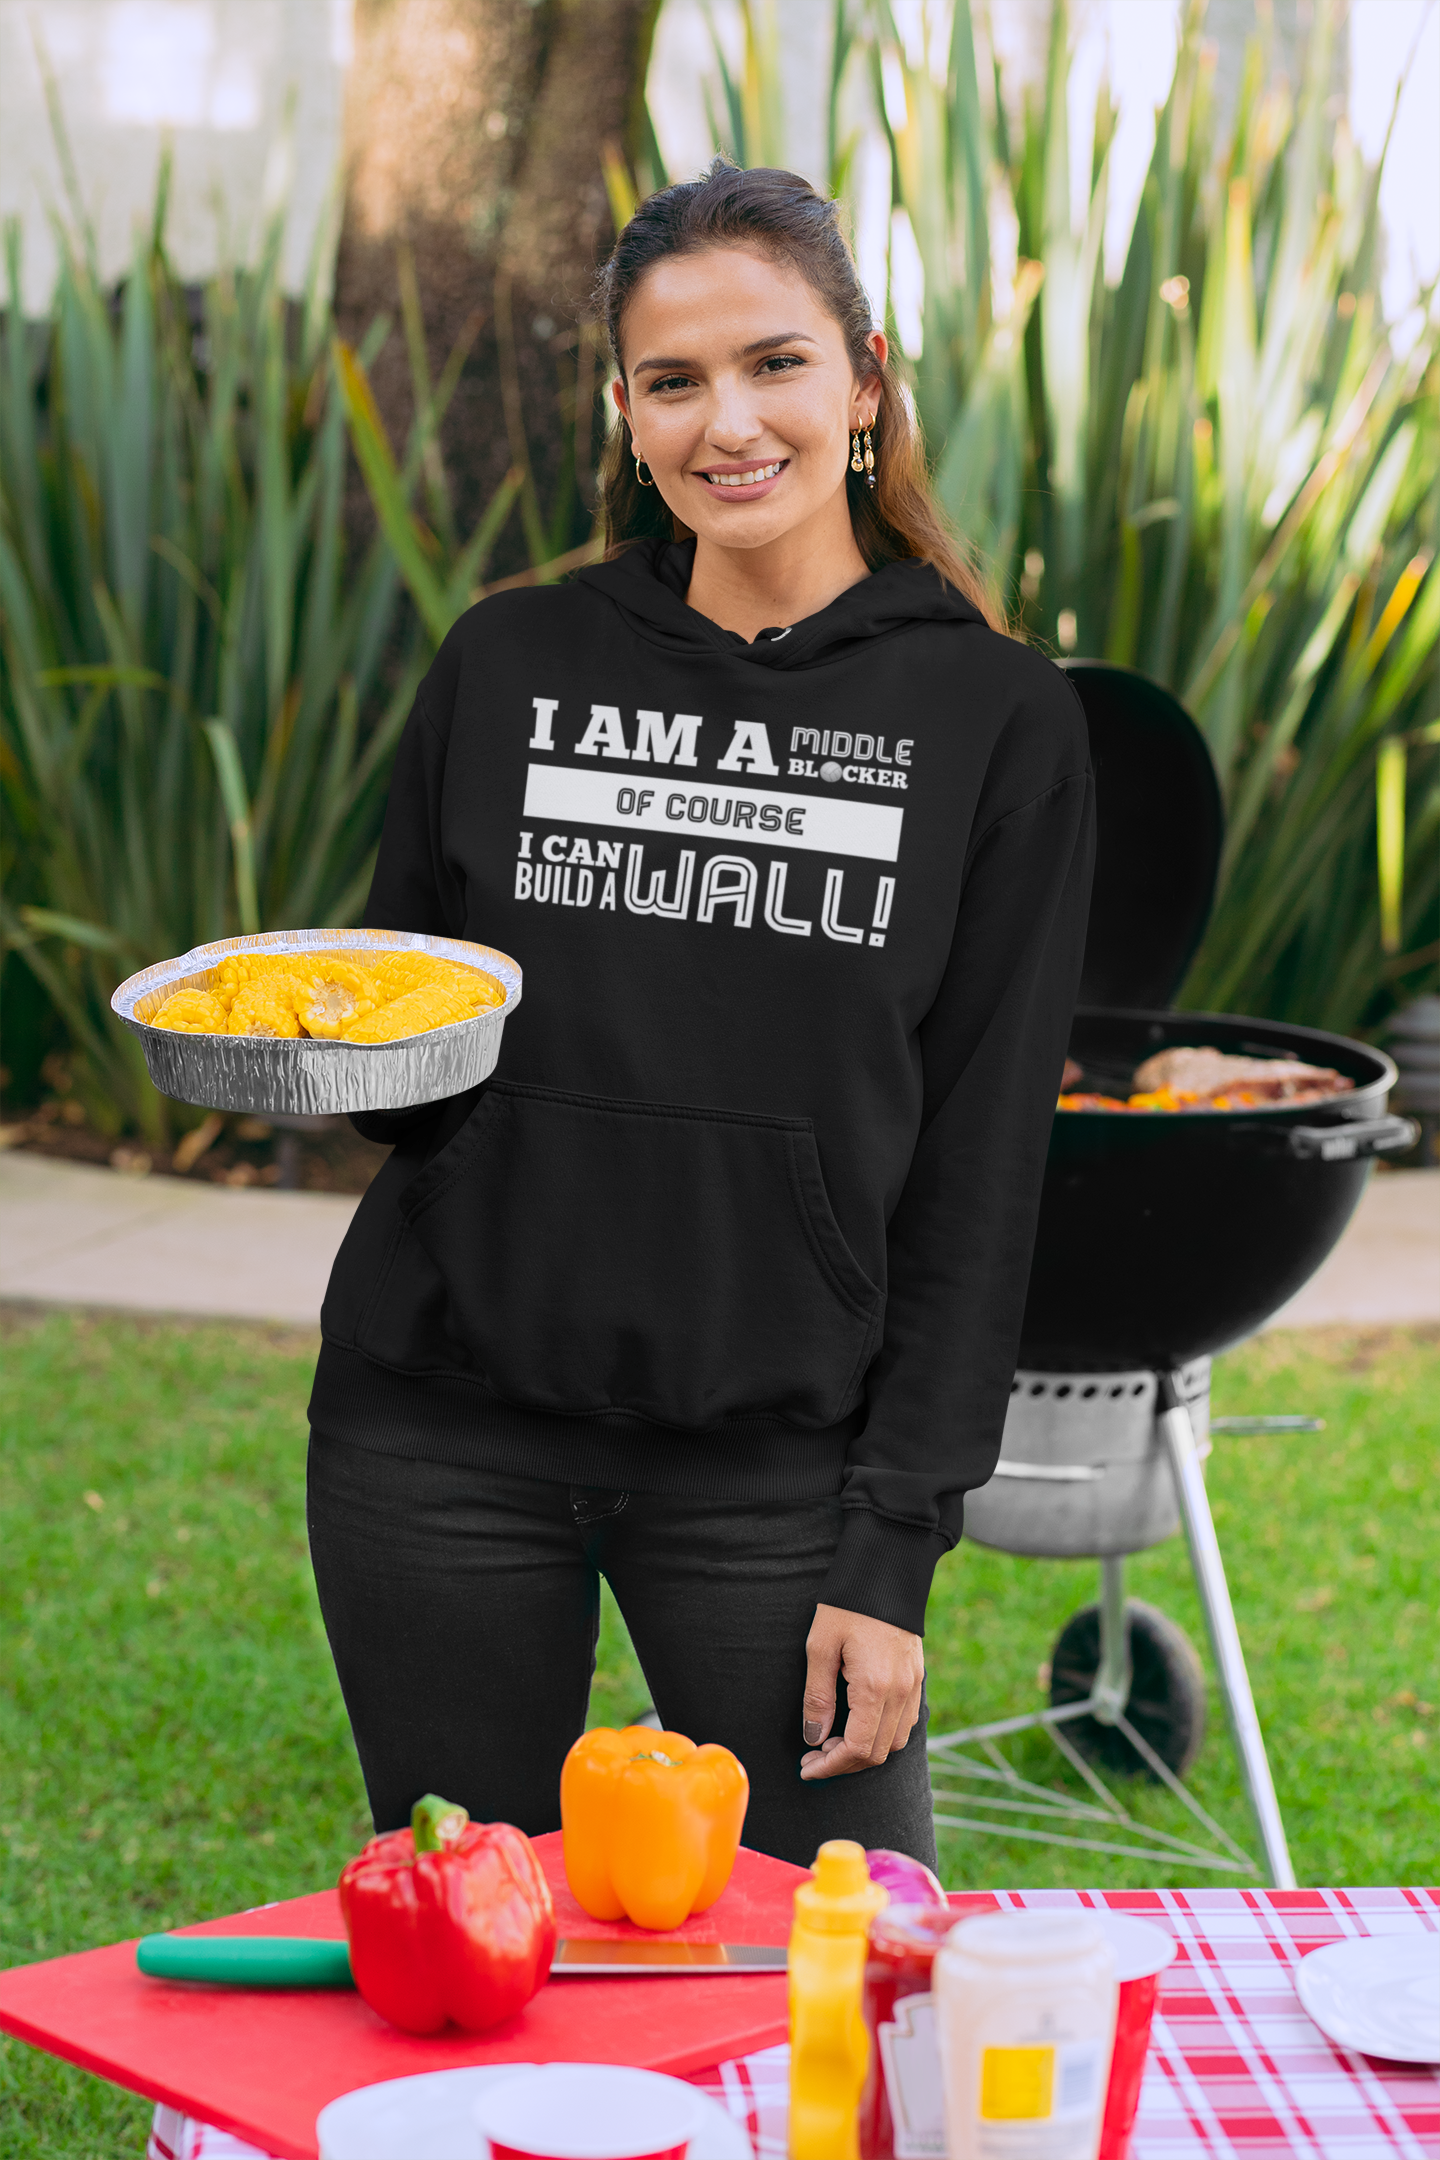 "I am a middle blocker of course I can build a wall!" volleyball t-shirts by Volleybragswag available on my Teespring shop. Click to place an order.